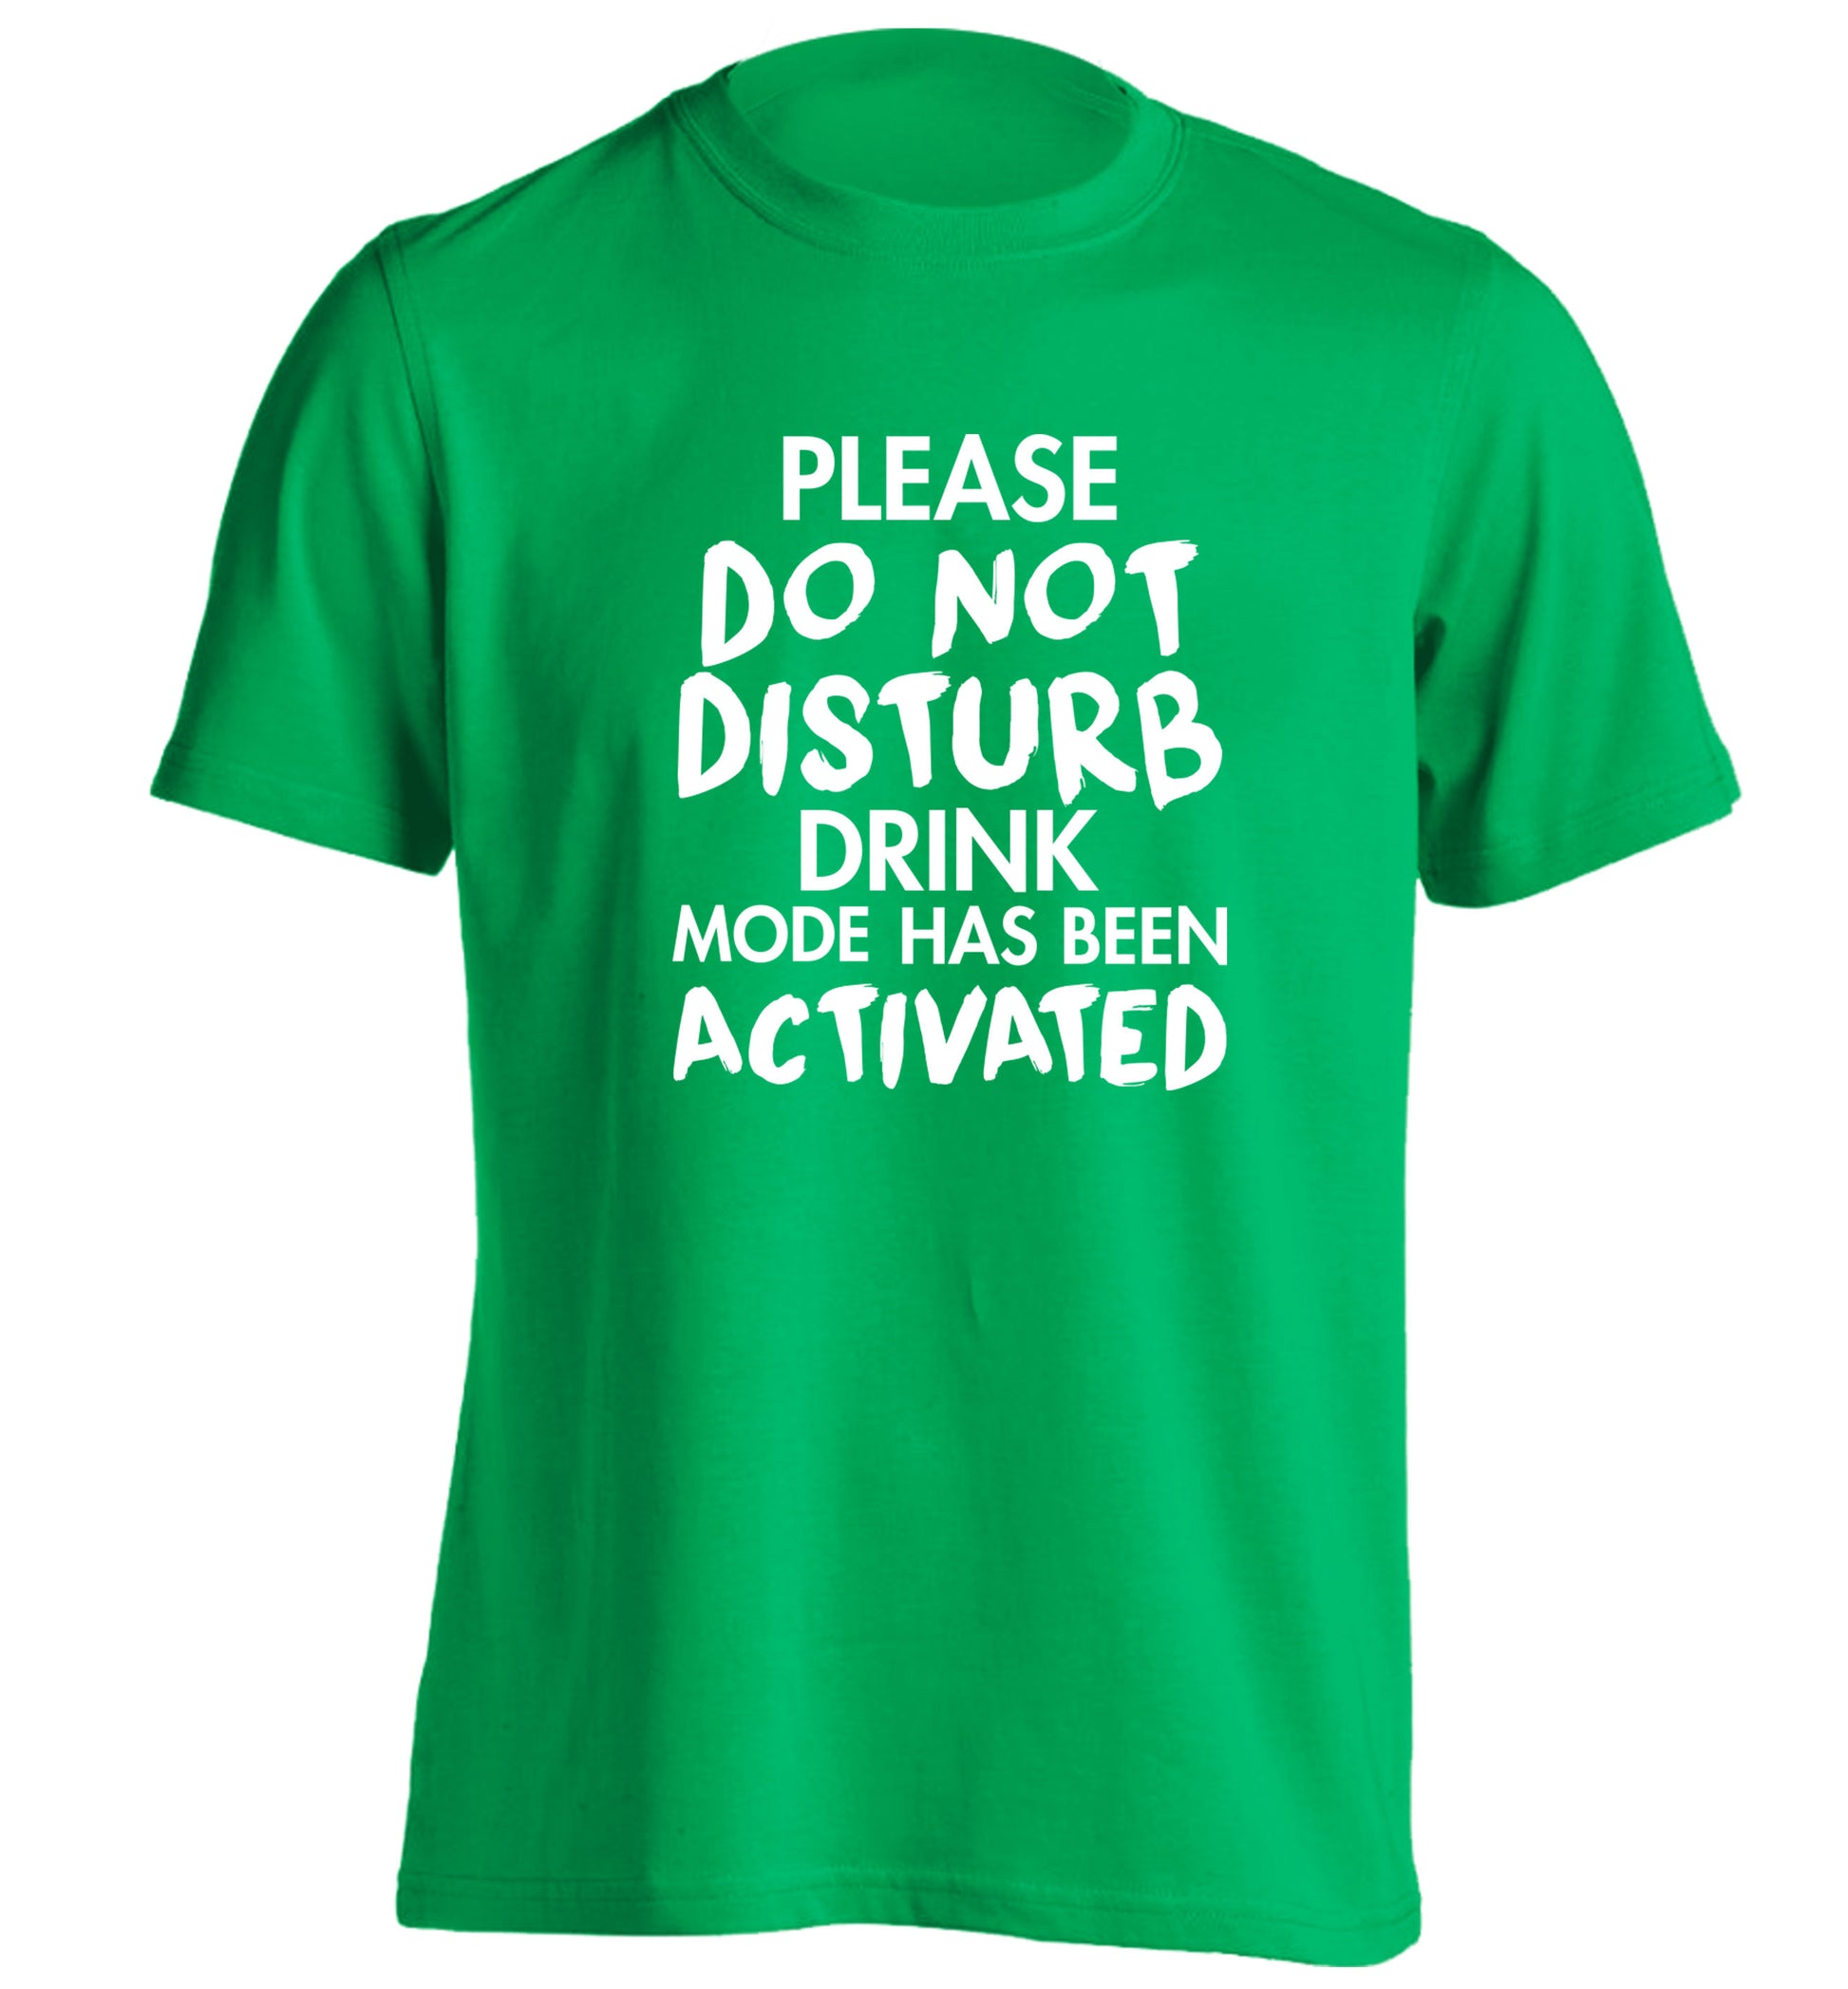 Please do not disturb drink mode has been activated adults unisex green Tshirt 2XL